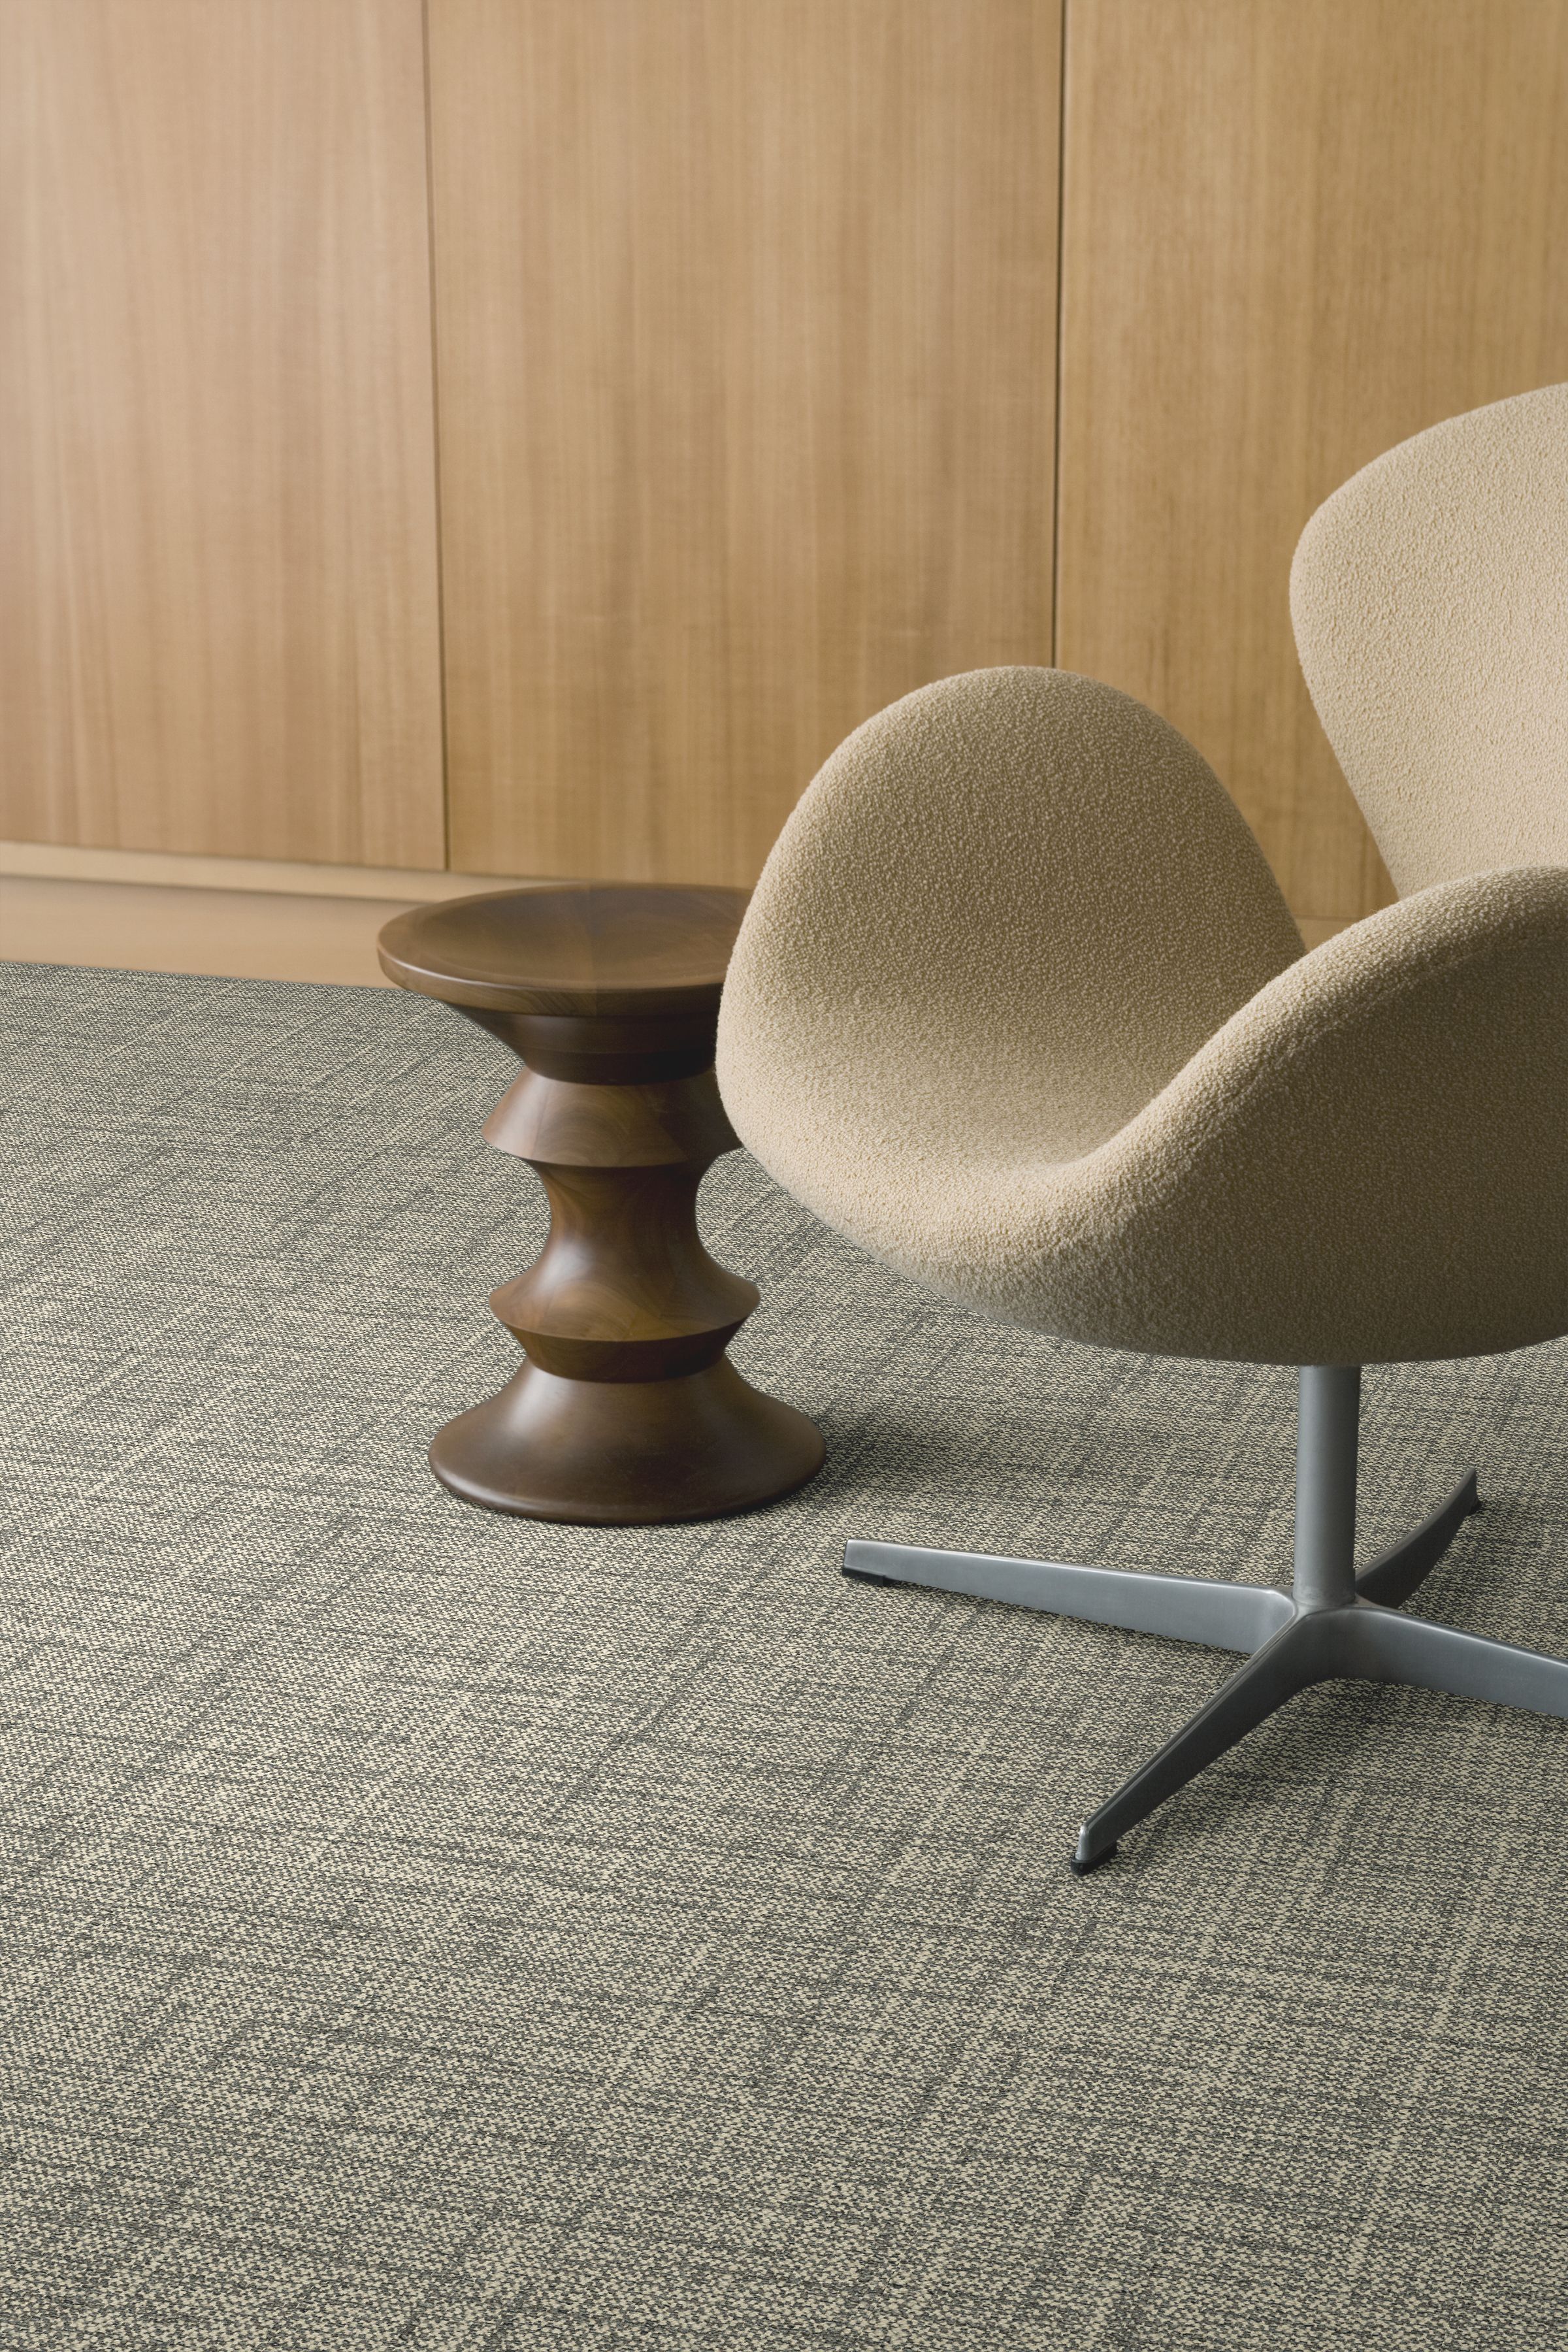 Interface Diminuendo plank carpet tile in close up with chair and small side table numéro d’image 8